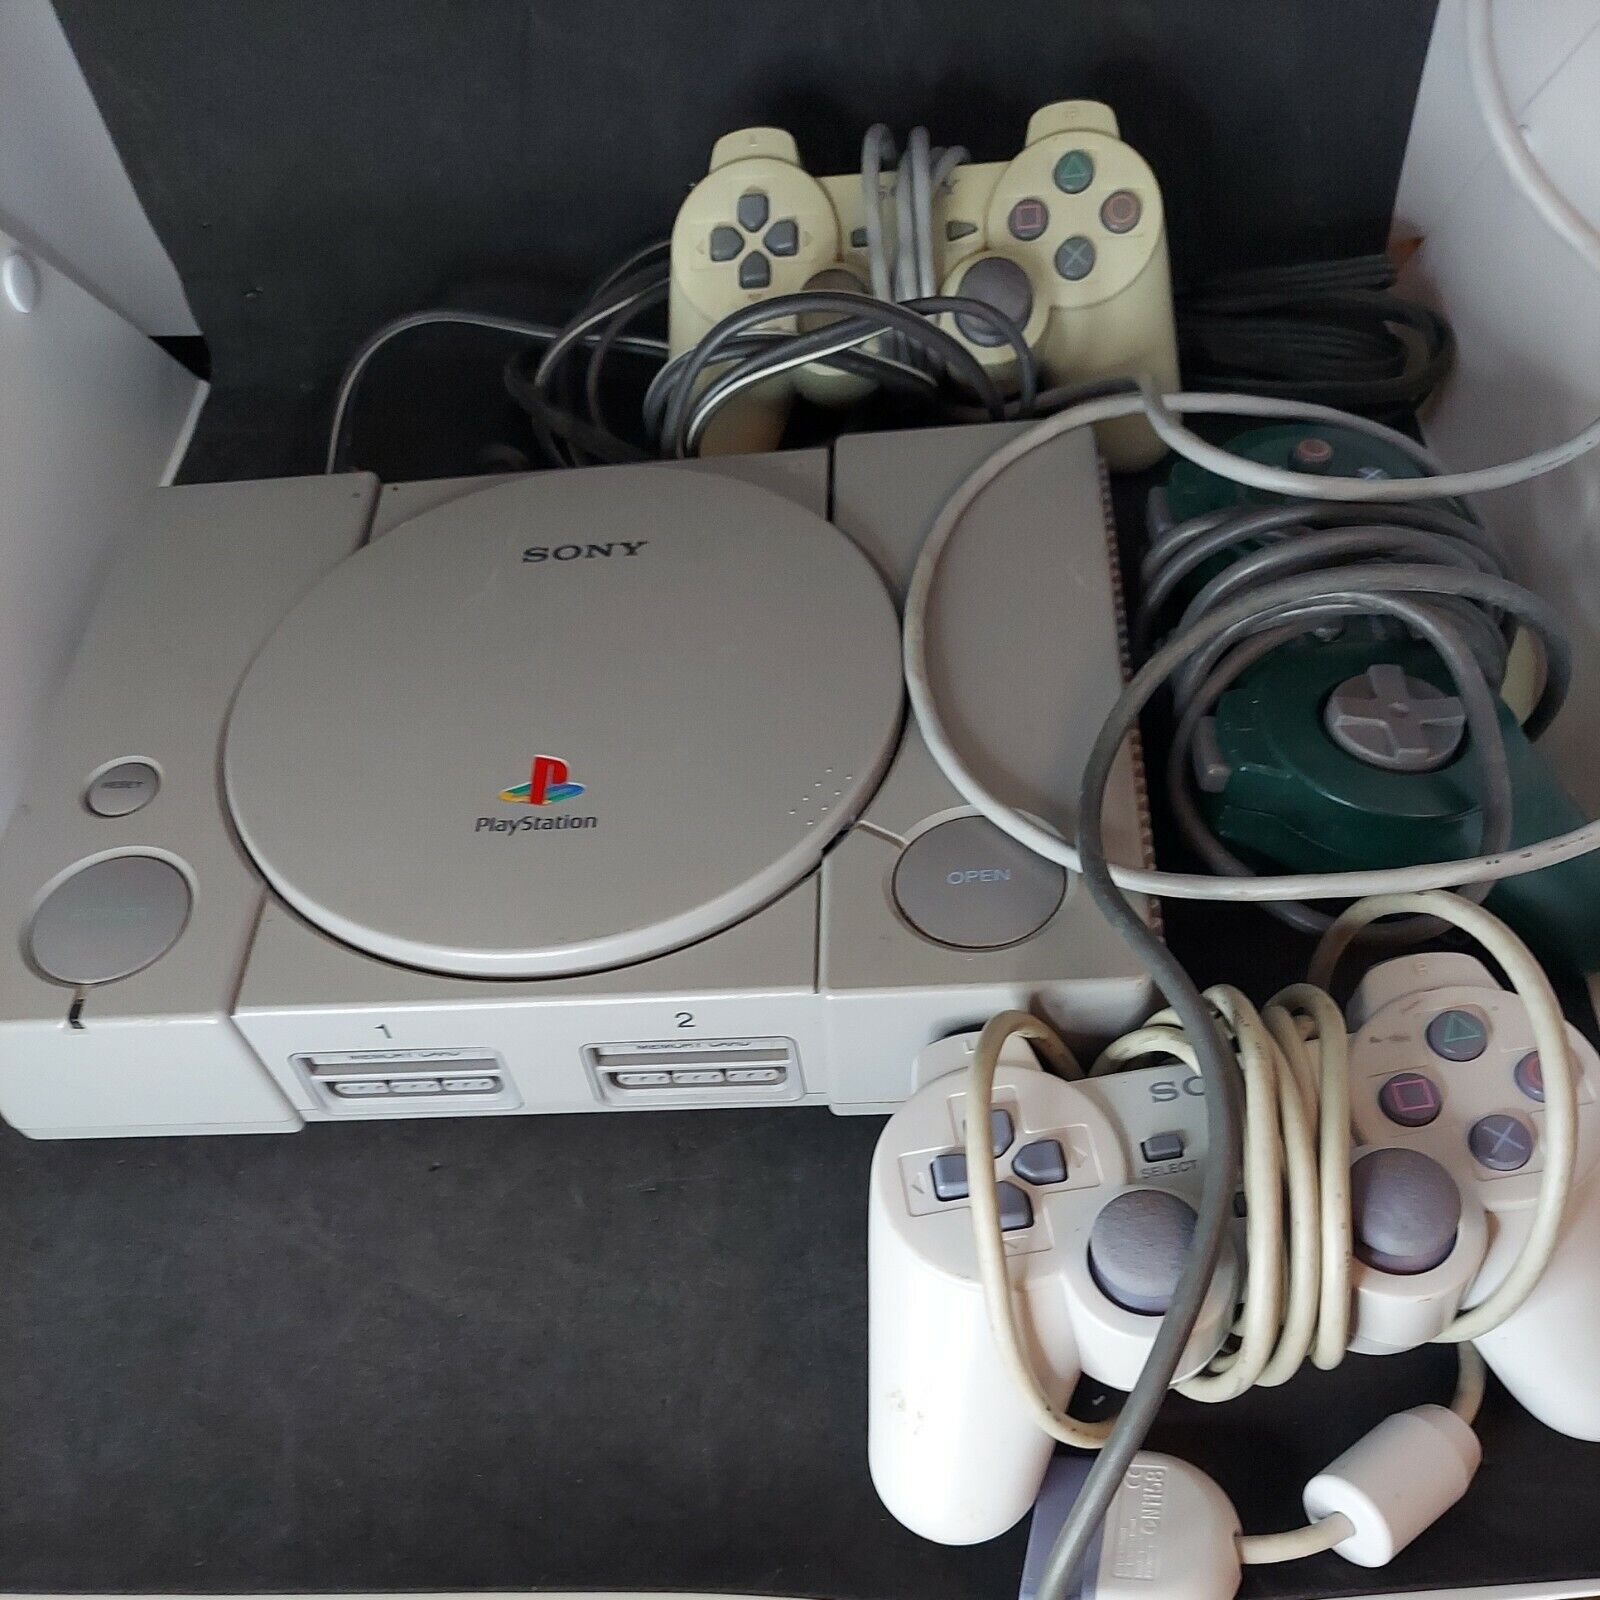 Sony Playstation 1 PS1 Console SCPH-9001 with Cables, Controllers